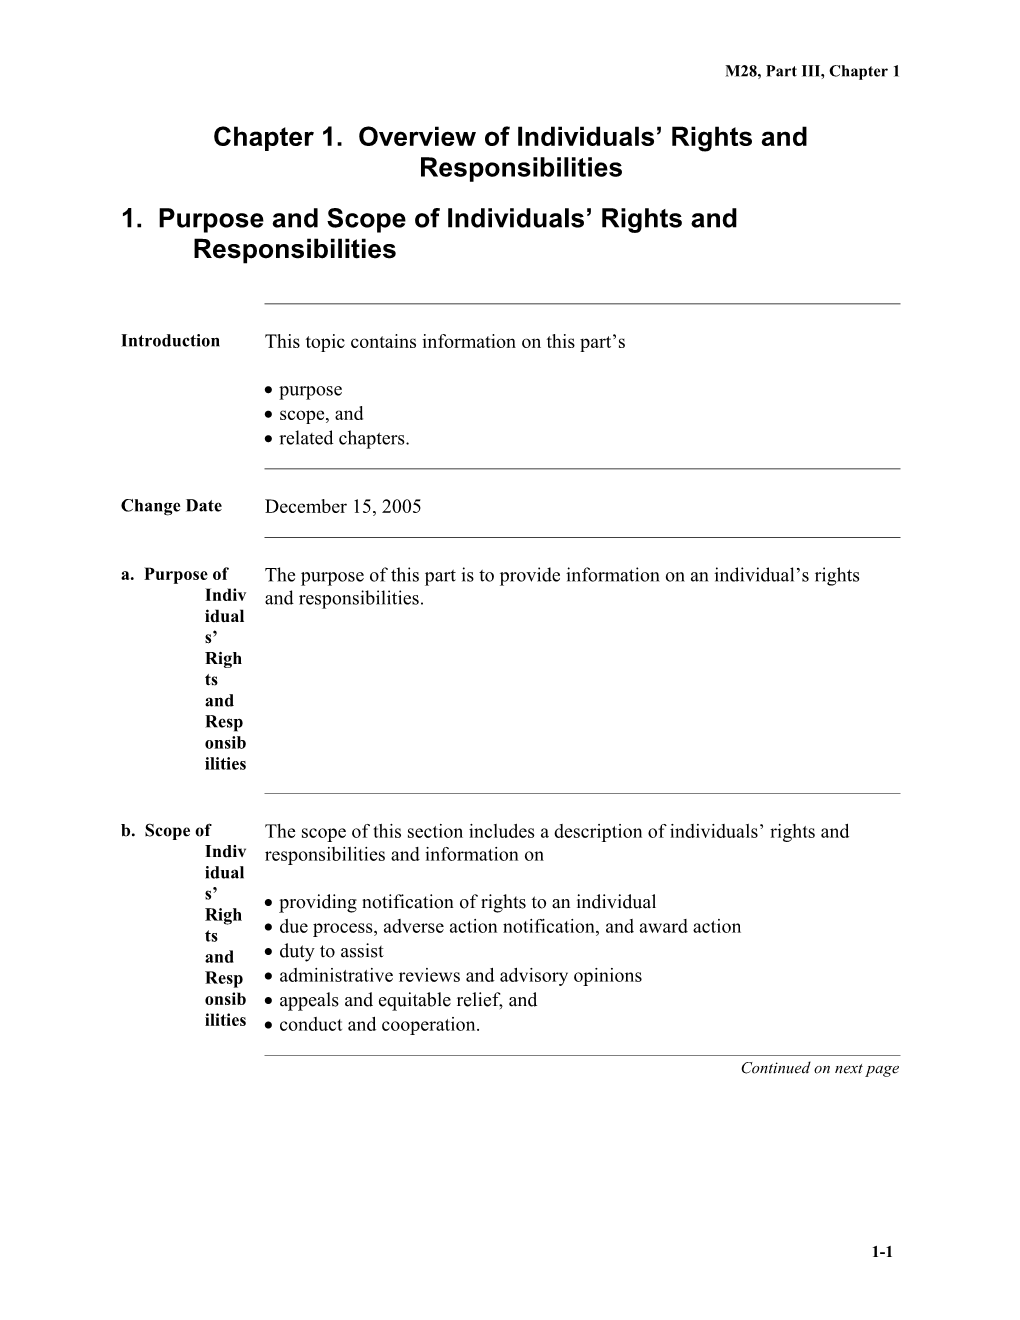 Chapter 1. Overview of Individuals Rights and Responsibilities